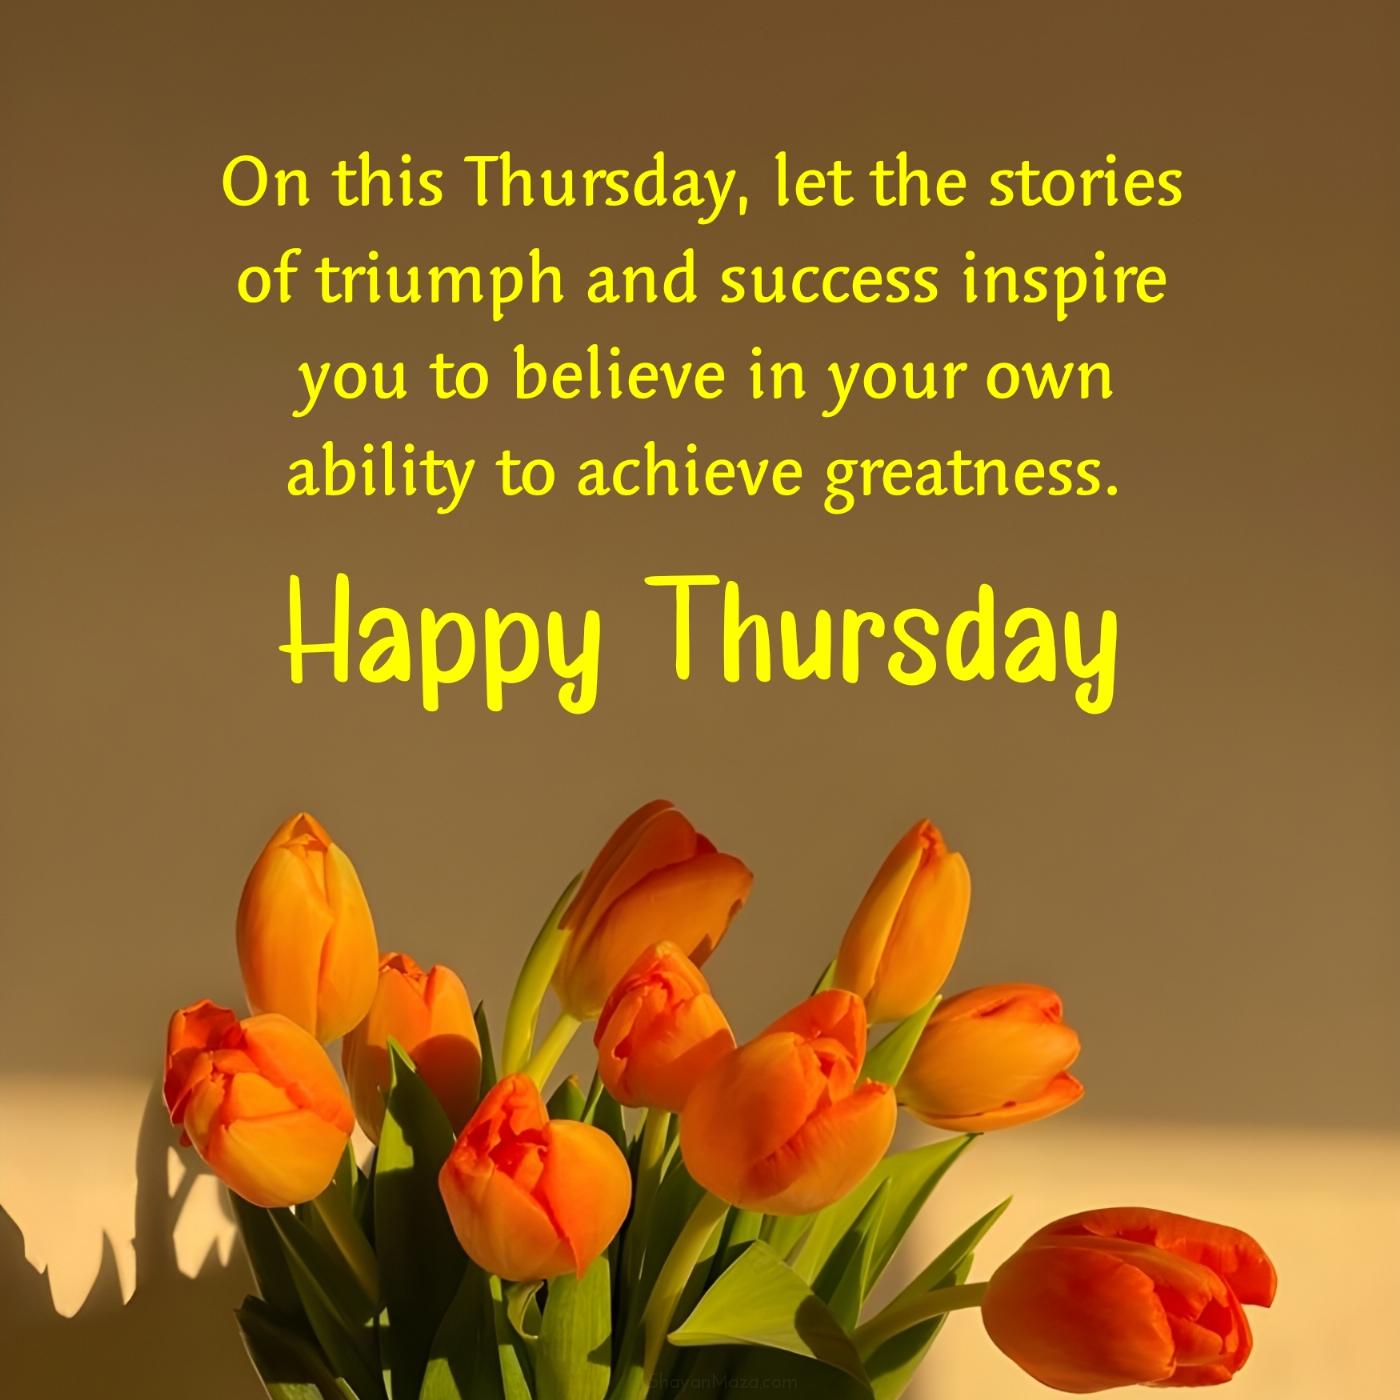 On this Thursday let the stories of triumph and success inspire you